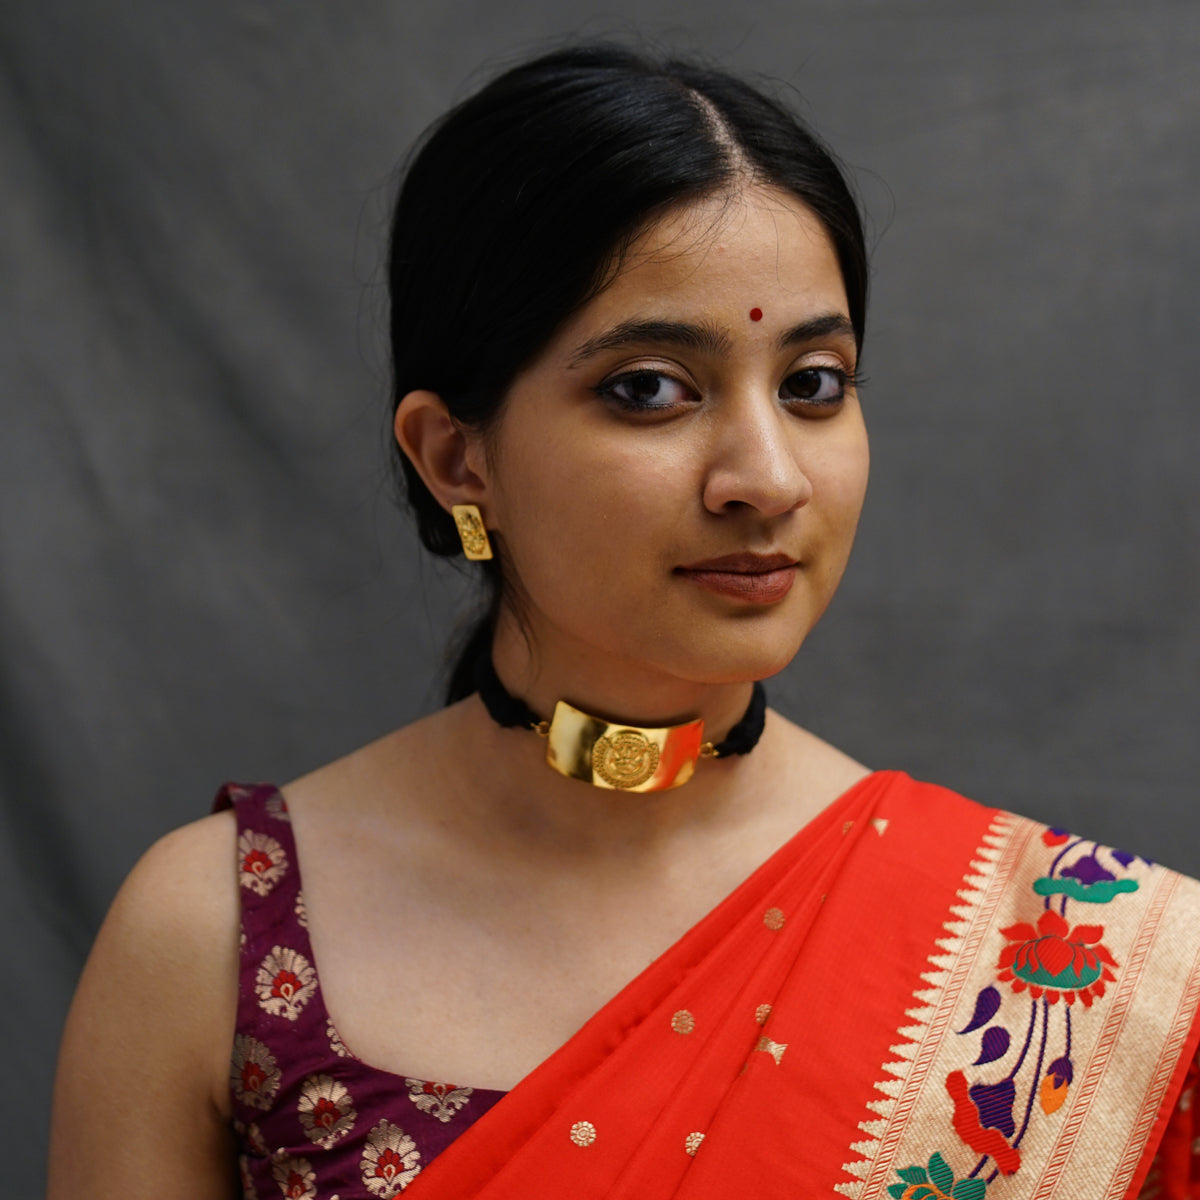 a woman wearing a red and gold sari